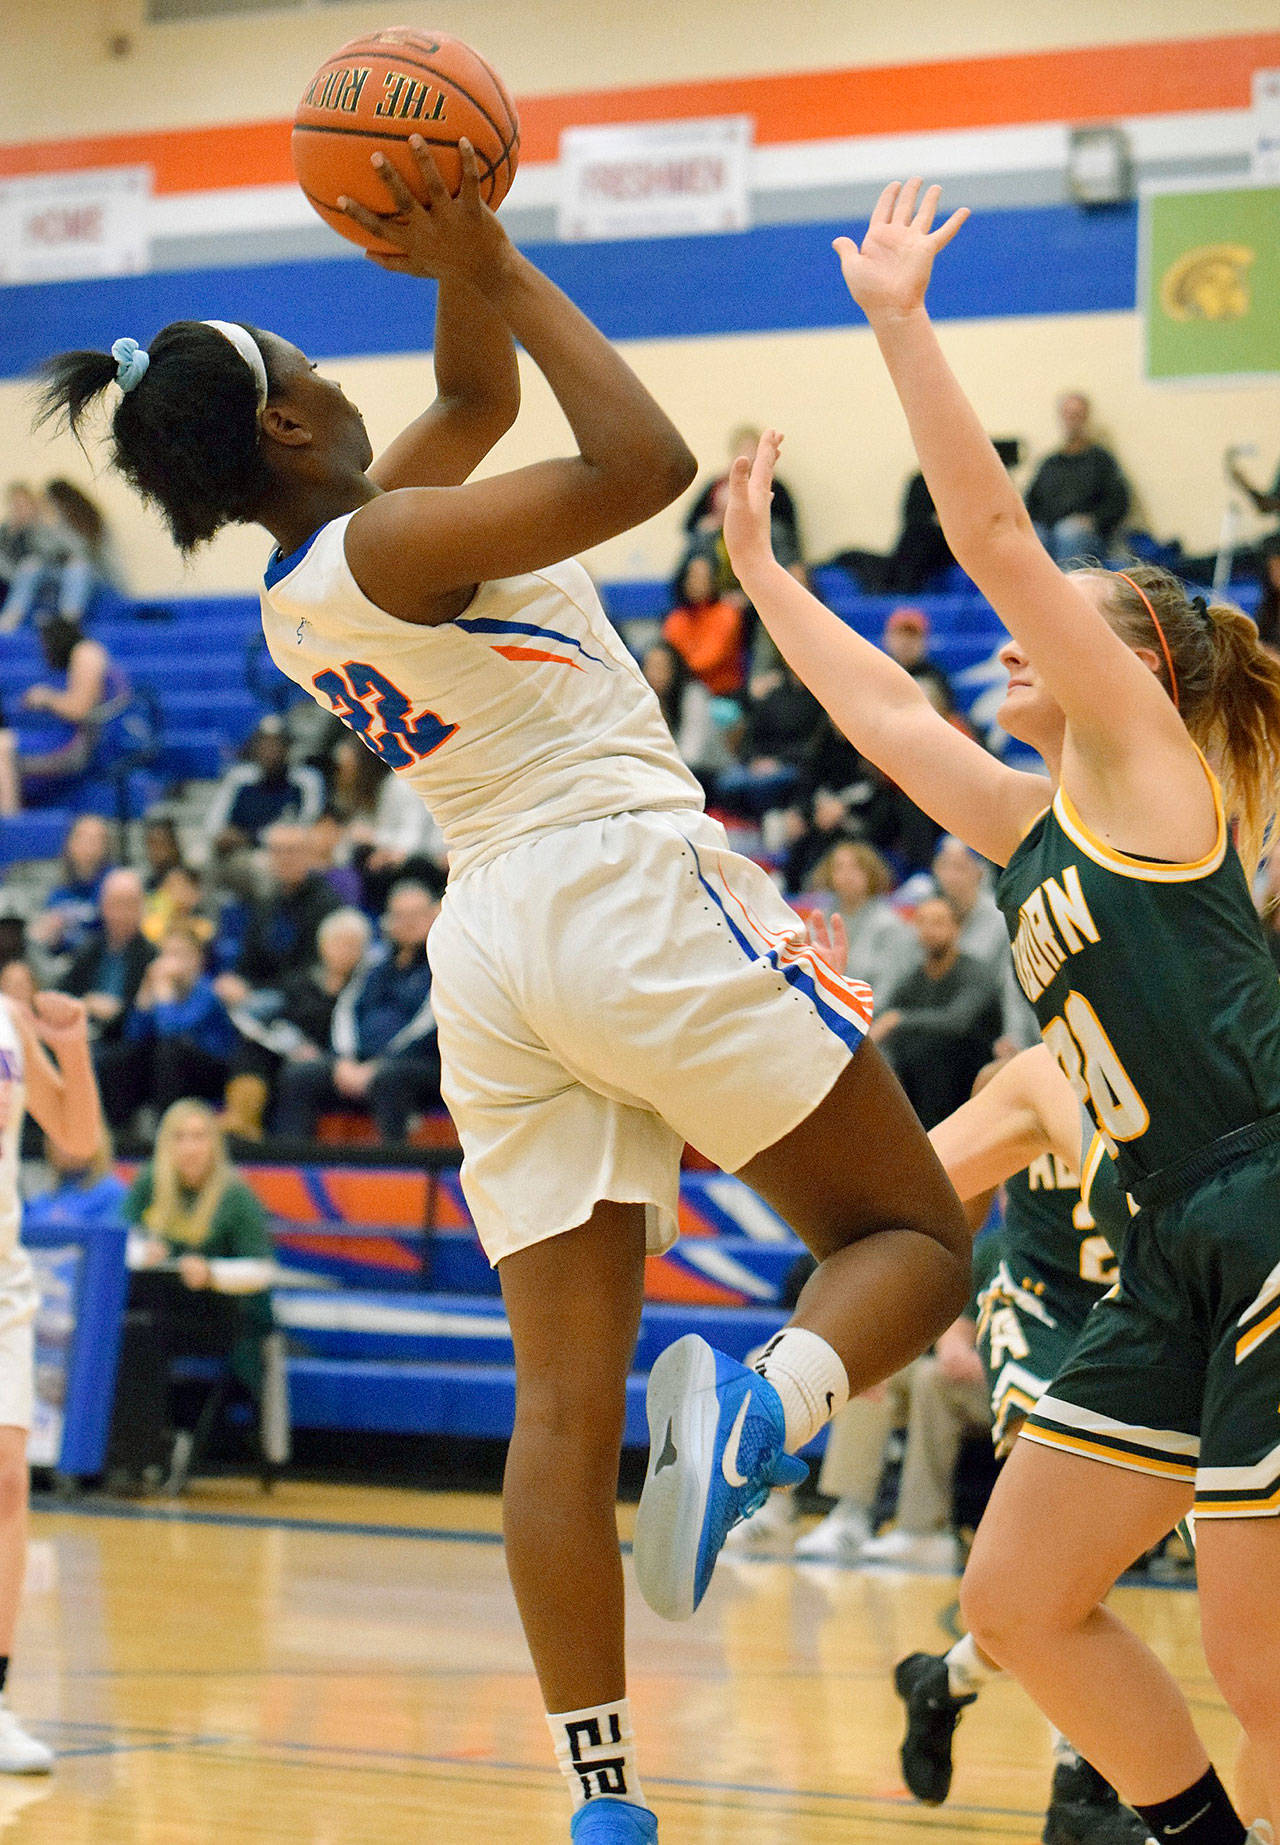 Auburn Mountainview’s Azaria Johnson delivers a shot during NPSL Olympic play against Auburn on Thursday. Johnson finished with 11 points. RACHEL CIAMPI, Auburn Reporter